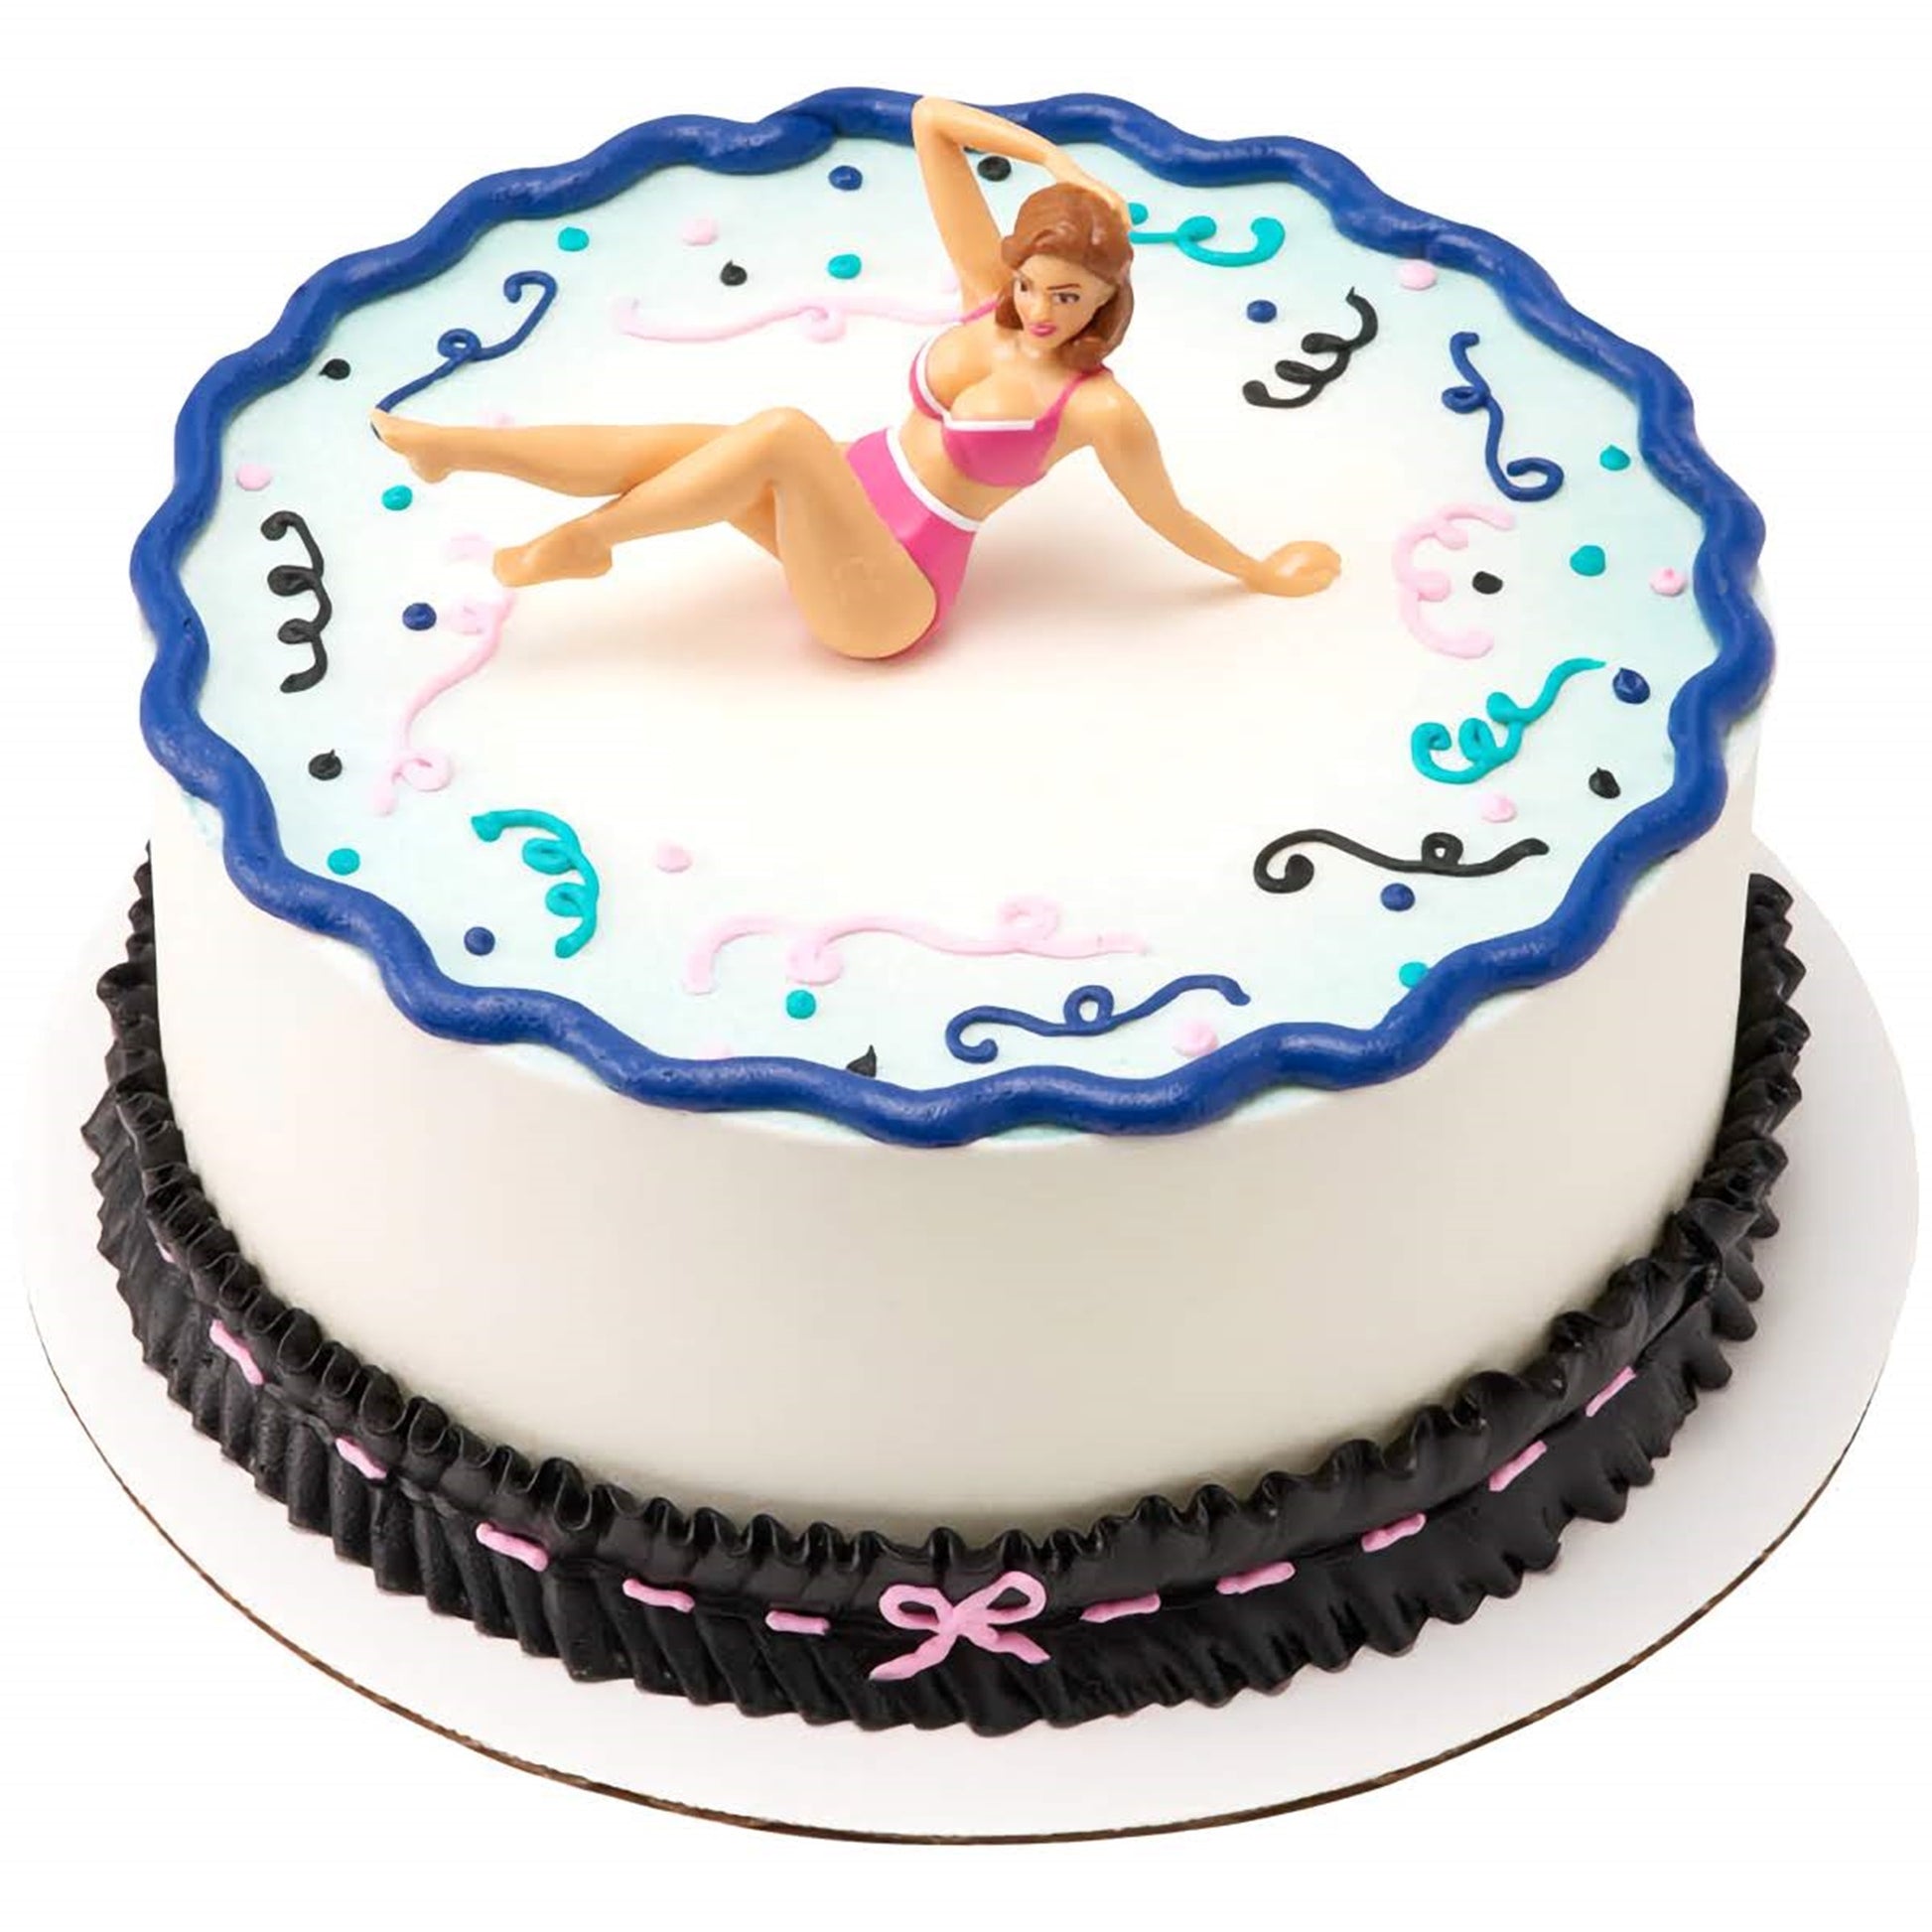 A festive round cake decorated with a figure of a woman in a bikini, encircled by blue waves on white icing, and finished with a black and pink border. Offered by Lynn's Cake, Candy, and Chocolate Supplies, it's a great choice for celebrations that call for a bit of humor and sass.